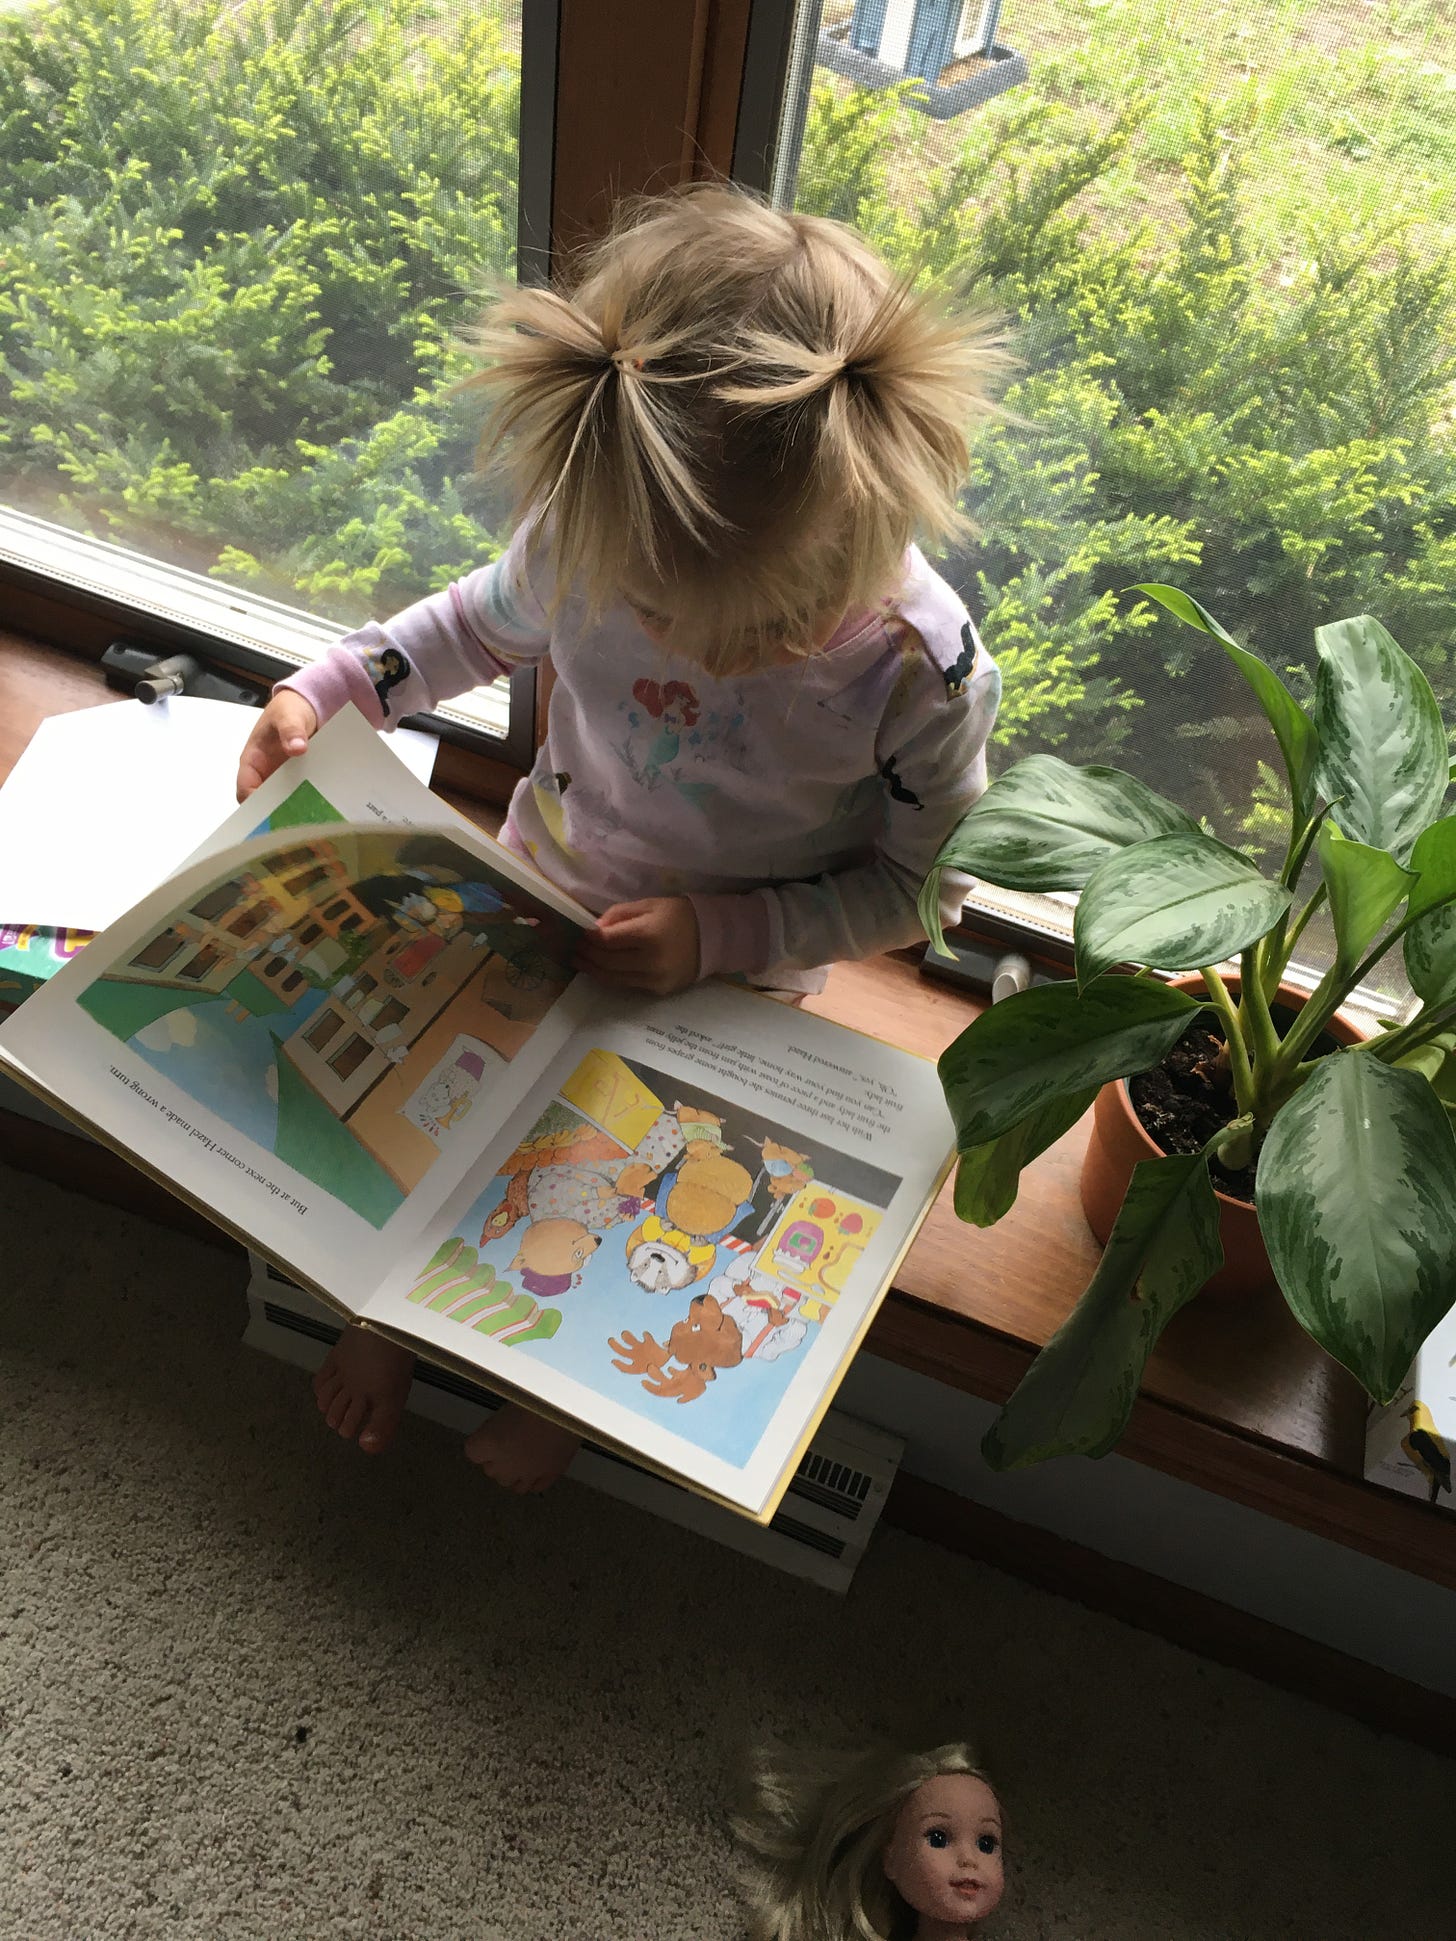 A little girl sitting on a windowsill reading a book next to a plant